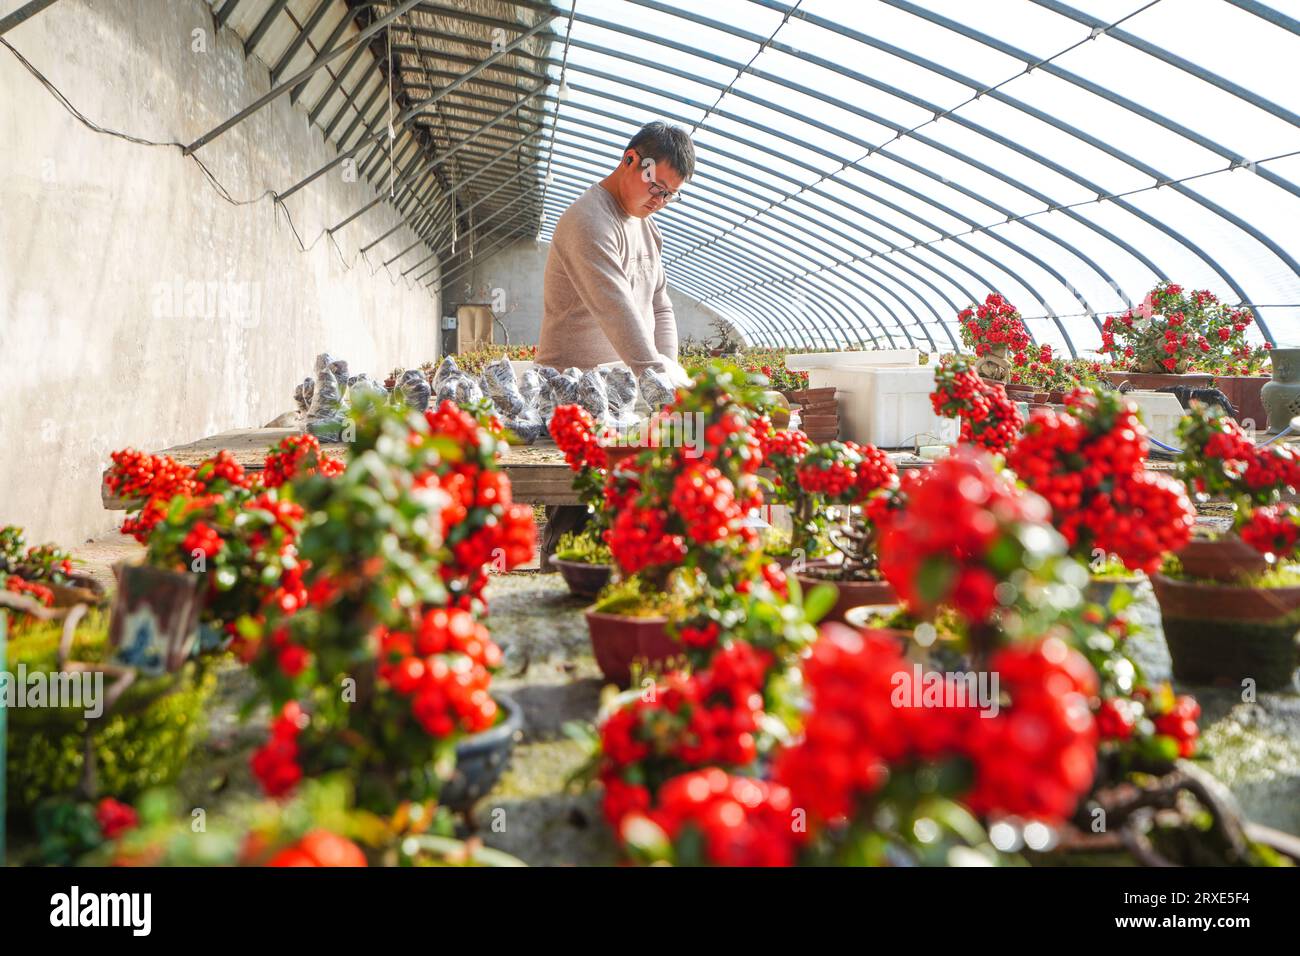 Luannan County, China - February 1, 2023: Flower growers put fire thorn miniature bonsai into foam boxes for export sales, Luannan County, Hebei Provi Stock Photo